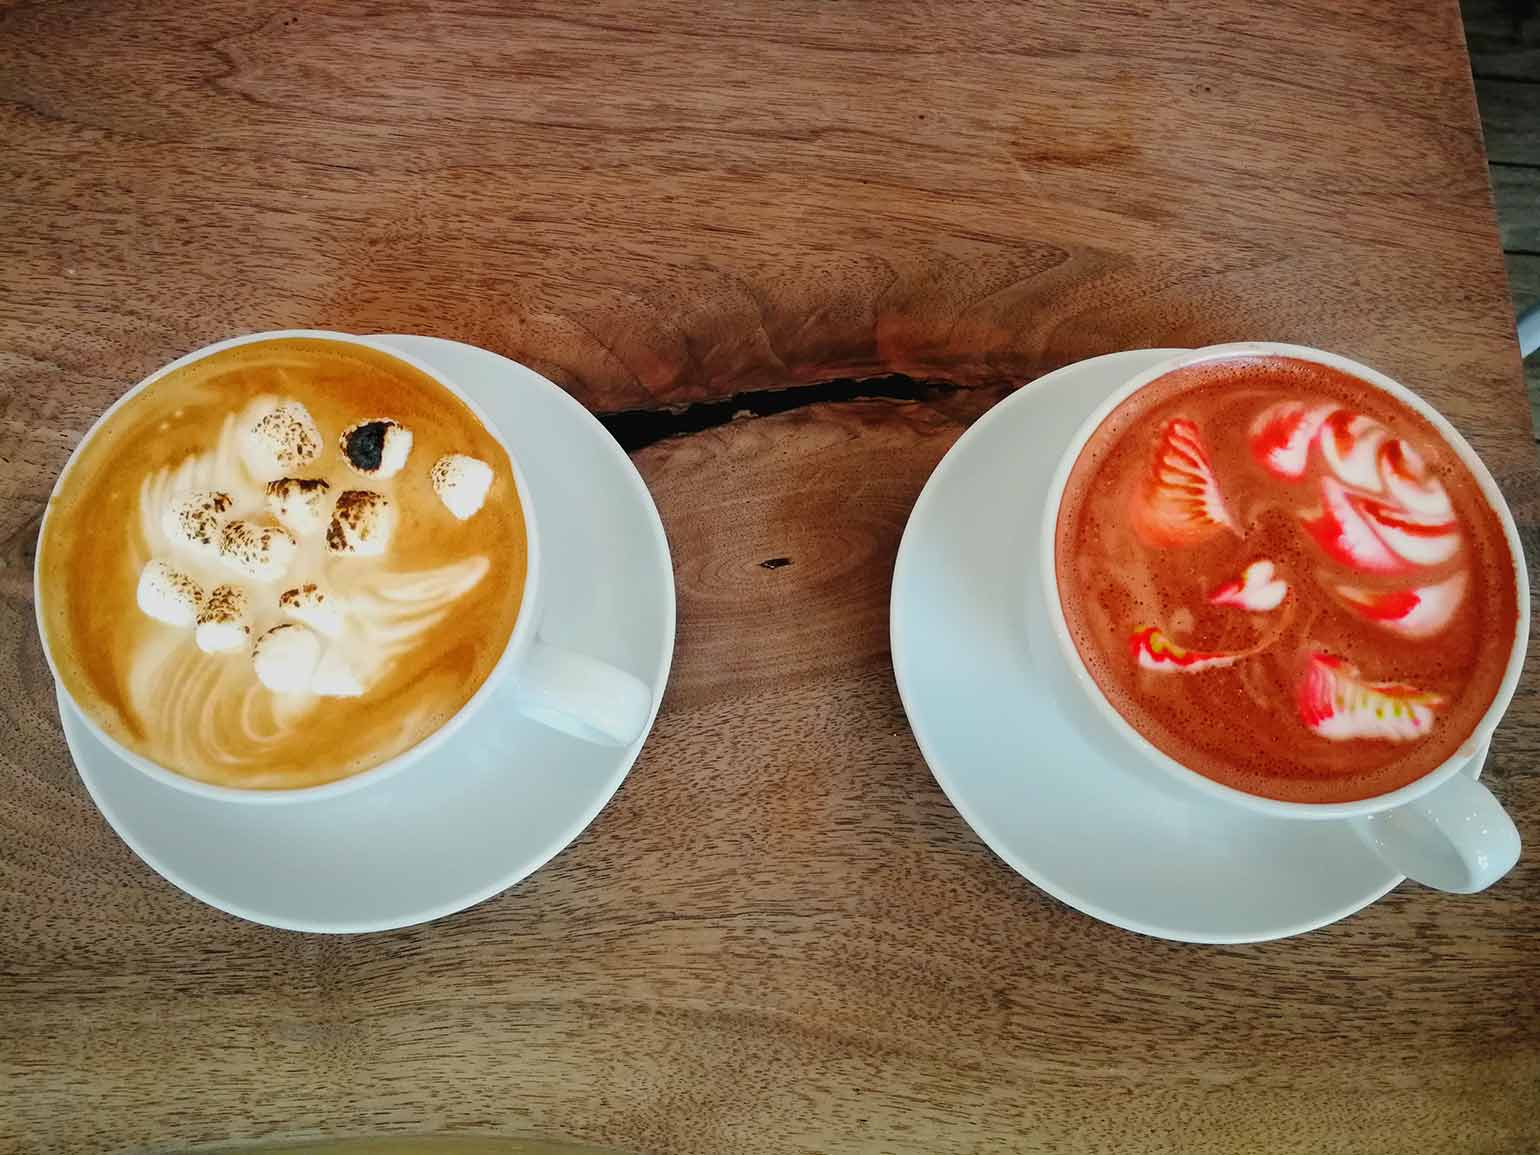 Coloured latte and Campfire latte served at Versus Coffee.